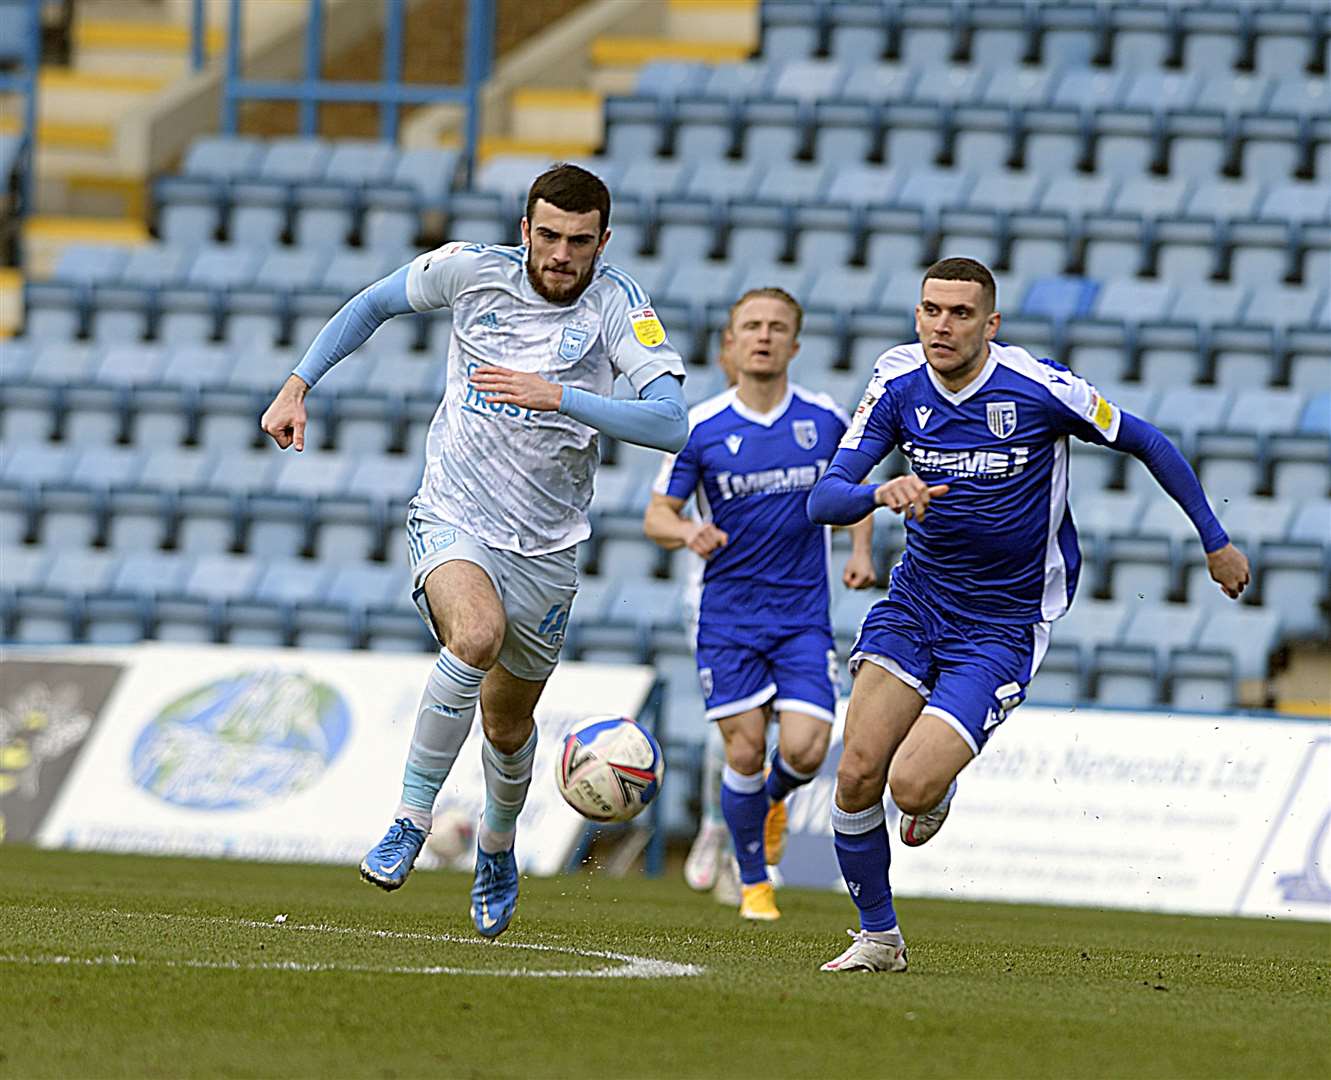 Stuart O'Keefe makes chase as teammate and captain Kyle Dempsey looks on against Ipswich Town Picture: Barry Goodwin